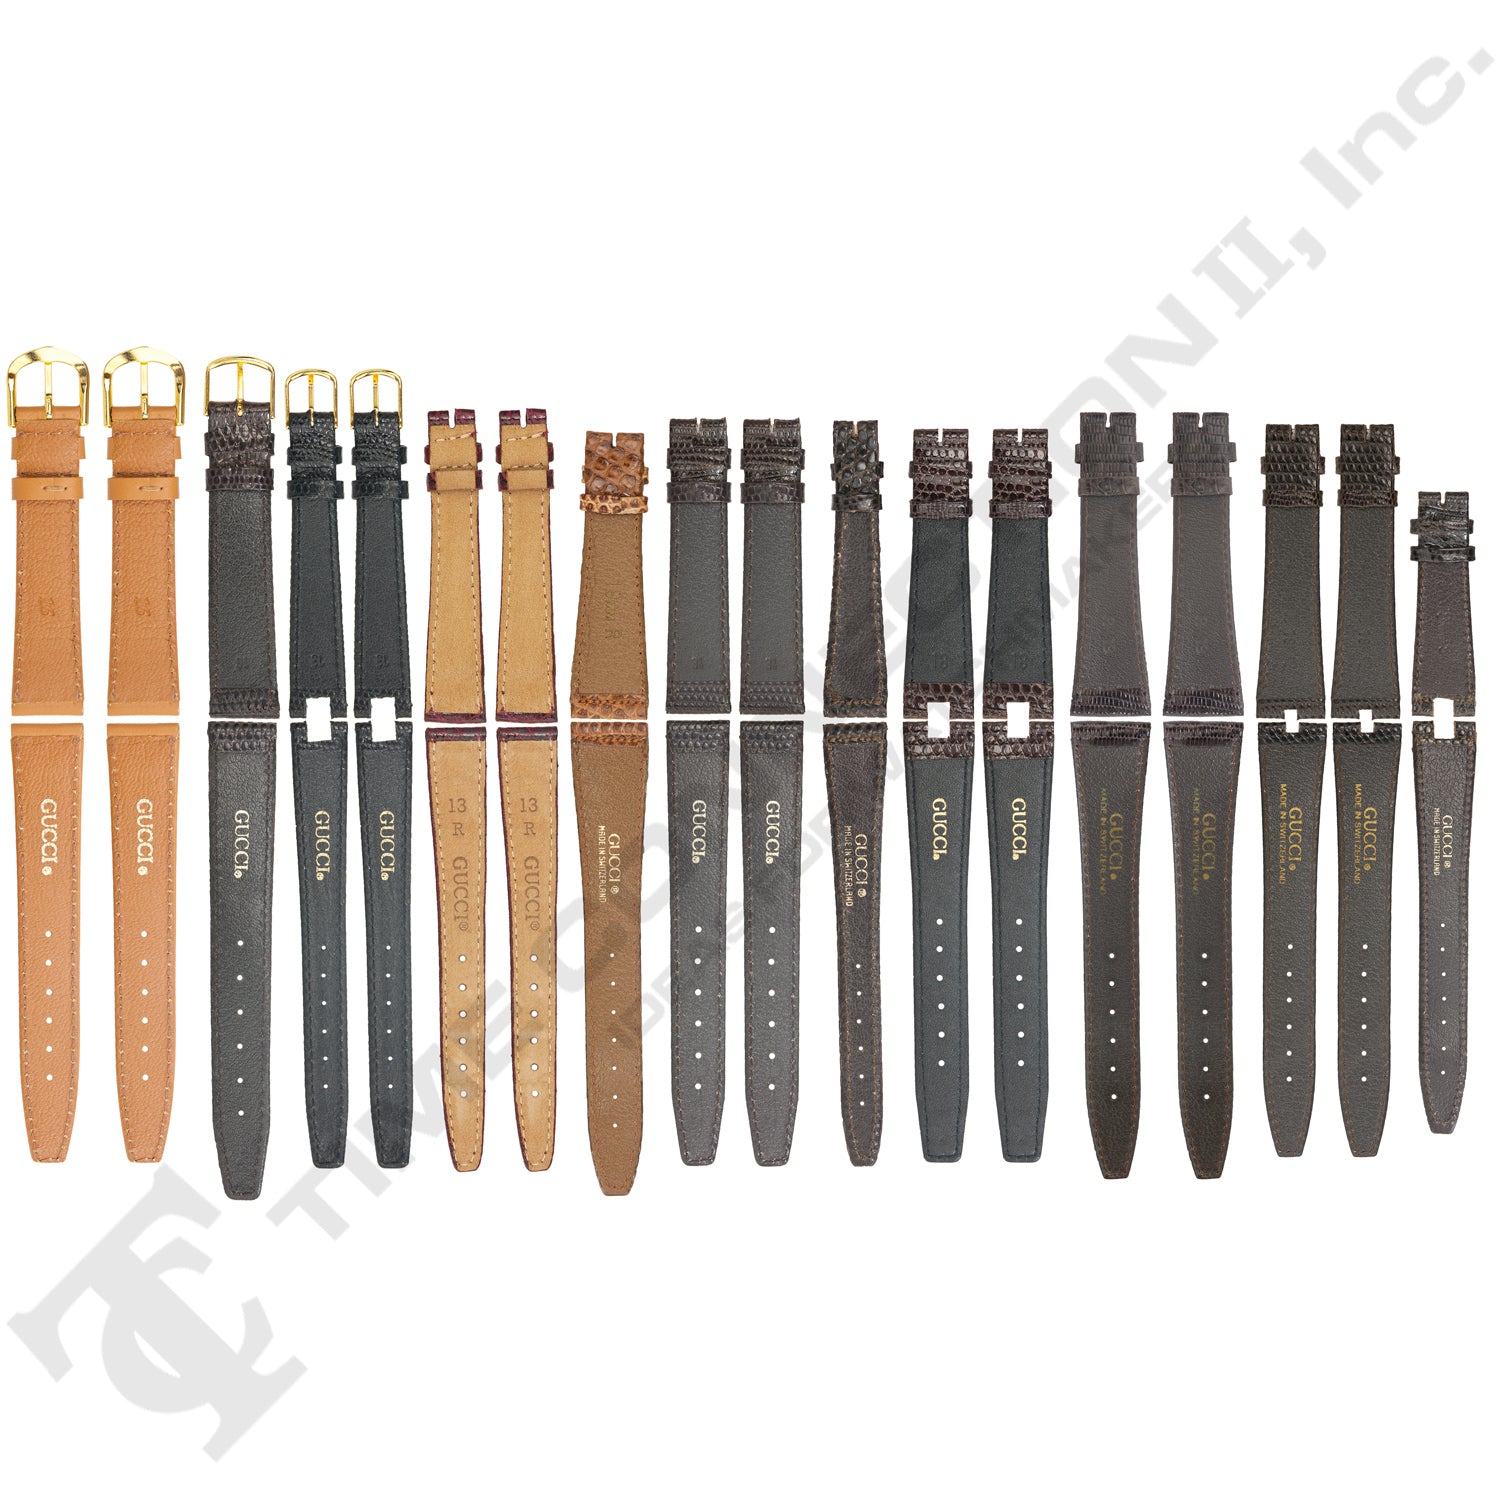 Gucci Leather Strap Assortment for Gucci Watches - Various Size / Colors (18 Total Bands)